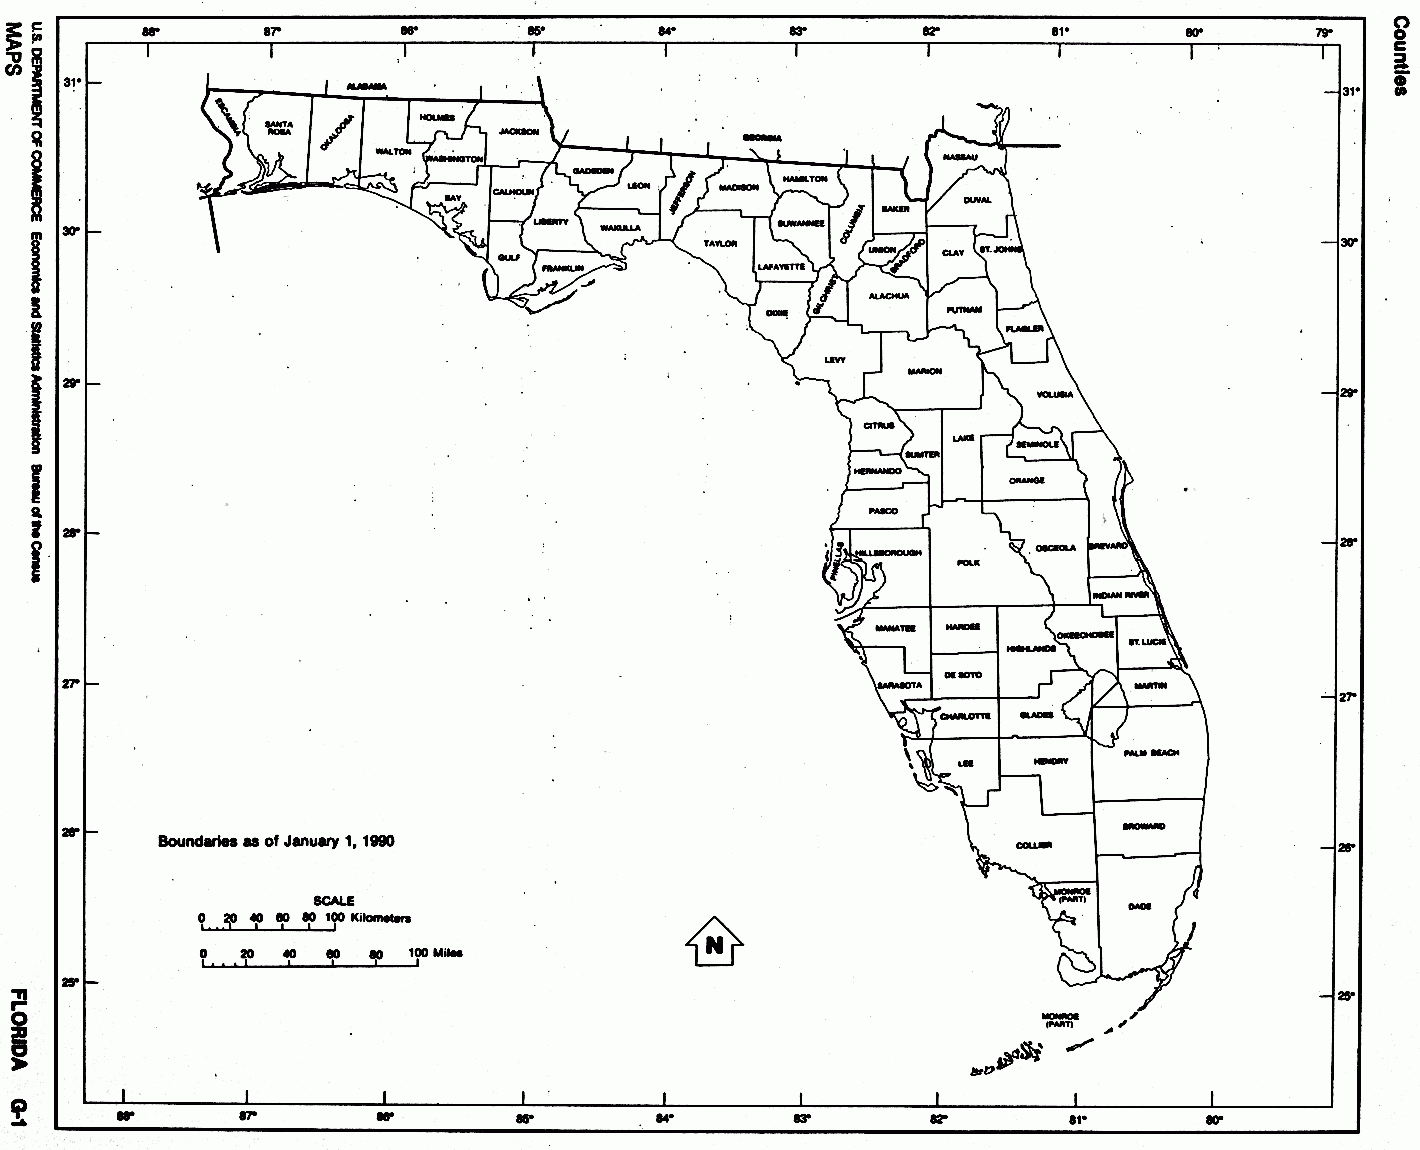 Florida Maps - Perry-Castañeda Map Collection - Ut Library Online - State Of Florida Map Mileage